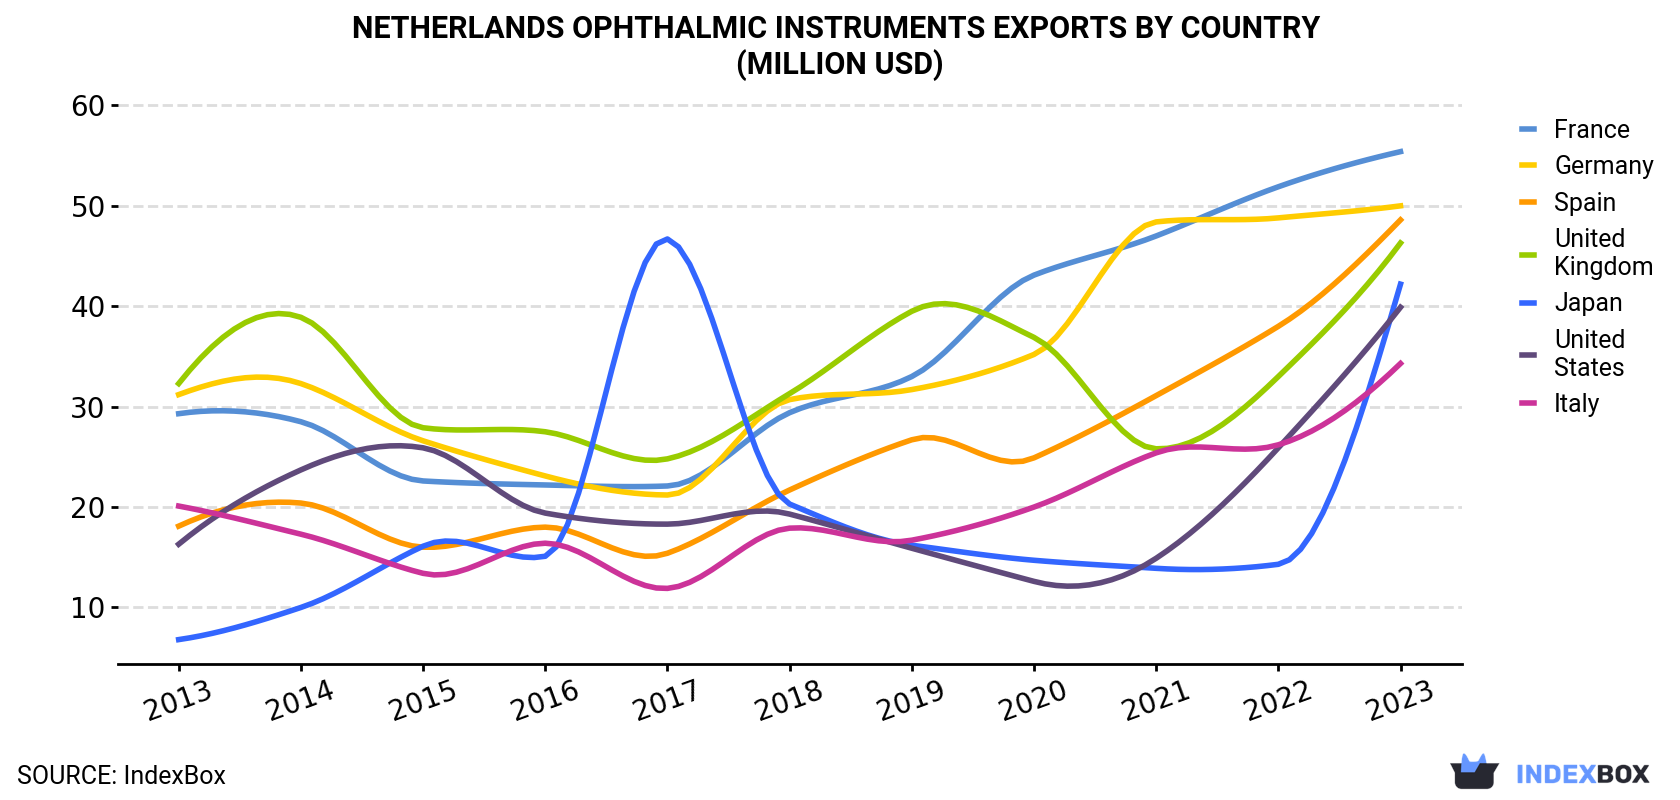 Netherlands Ophthalmic Instruments Exports By Country (Million USD)